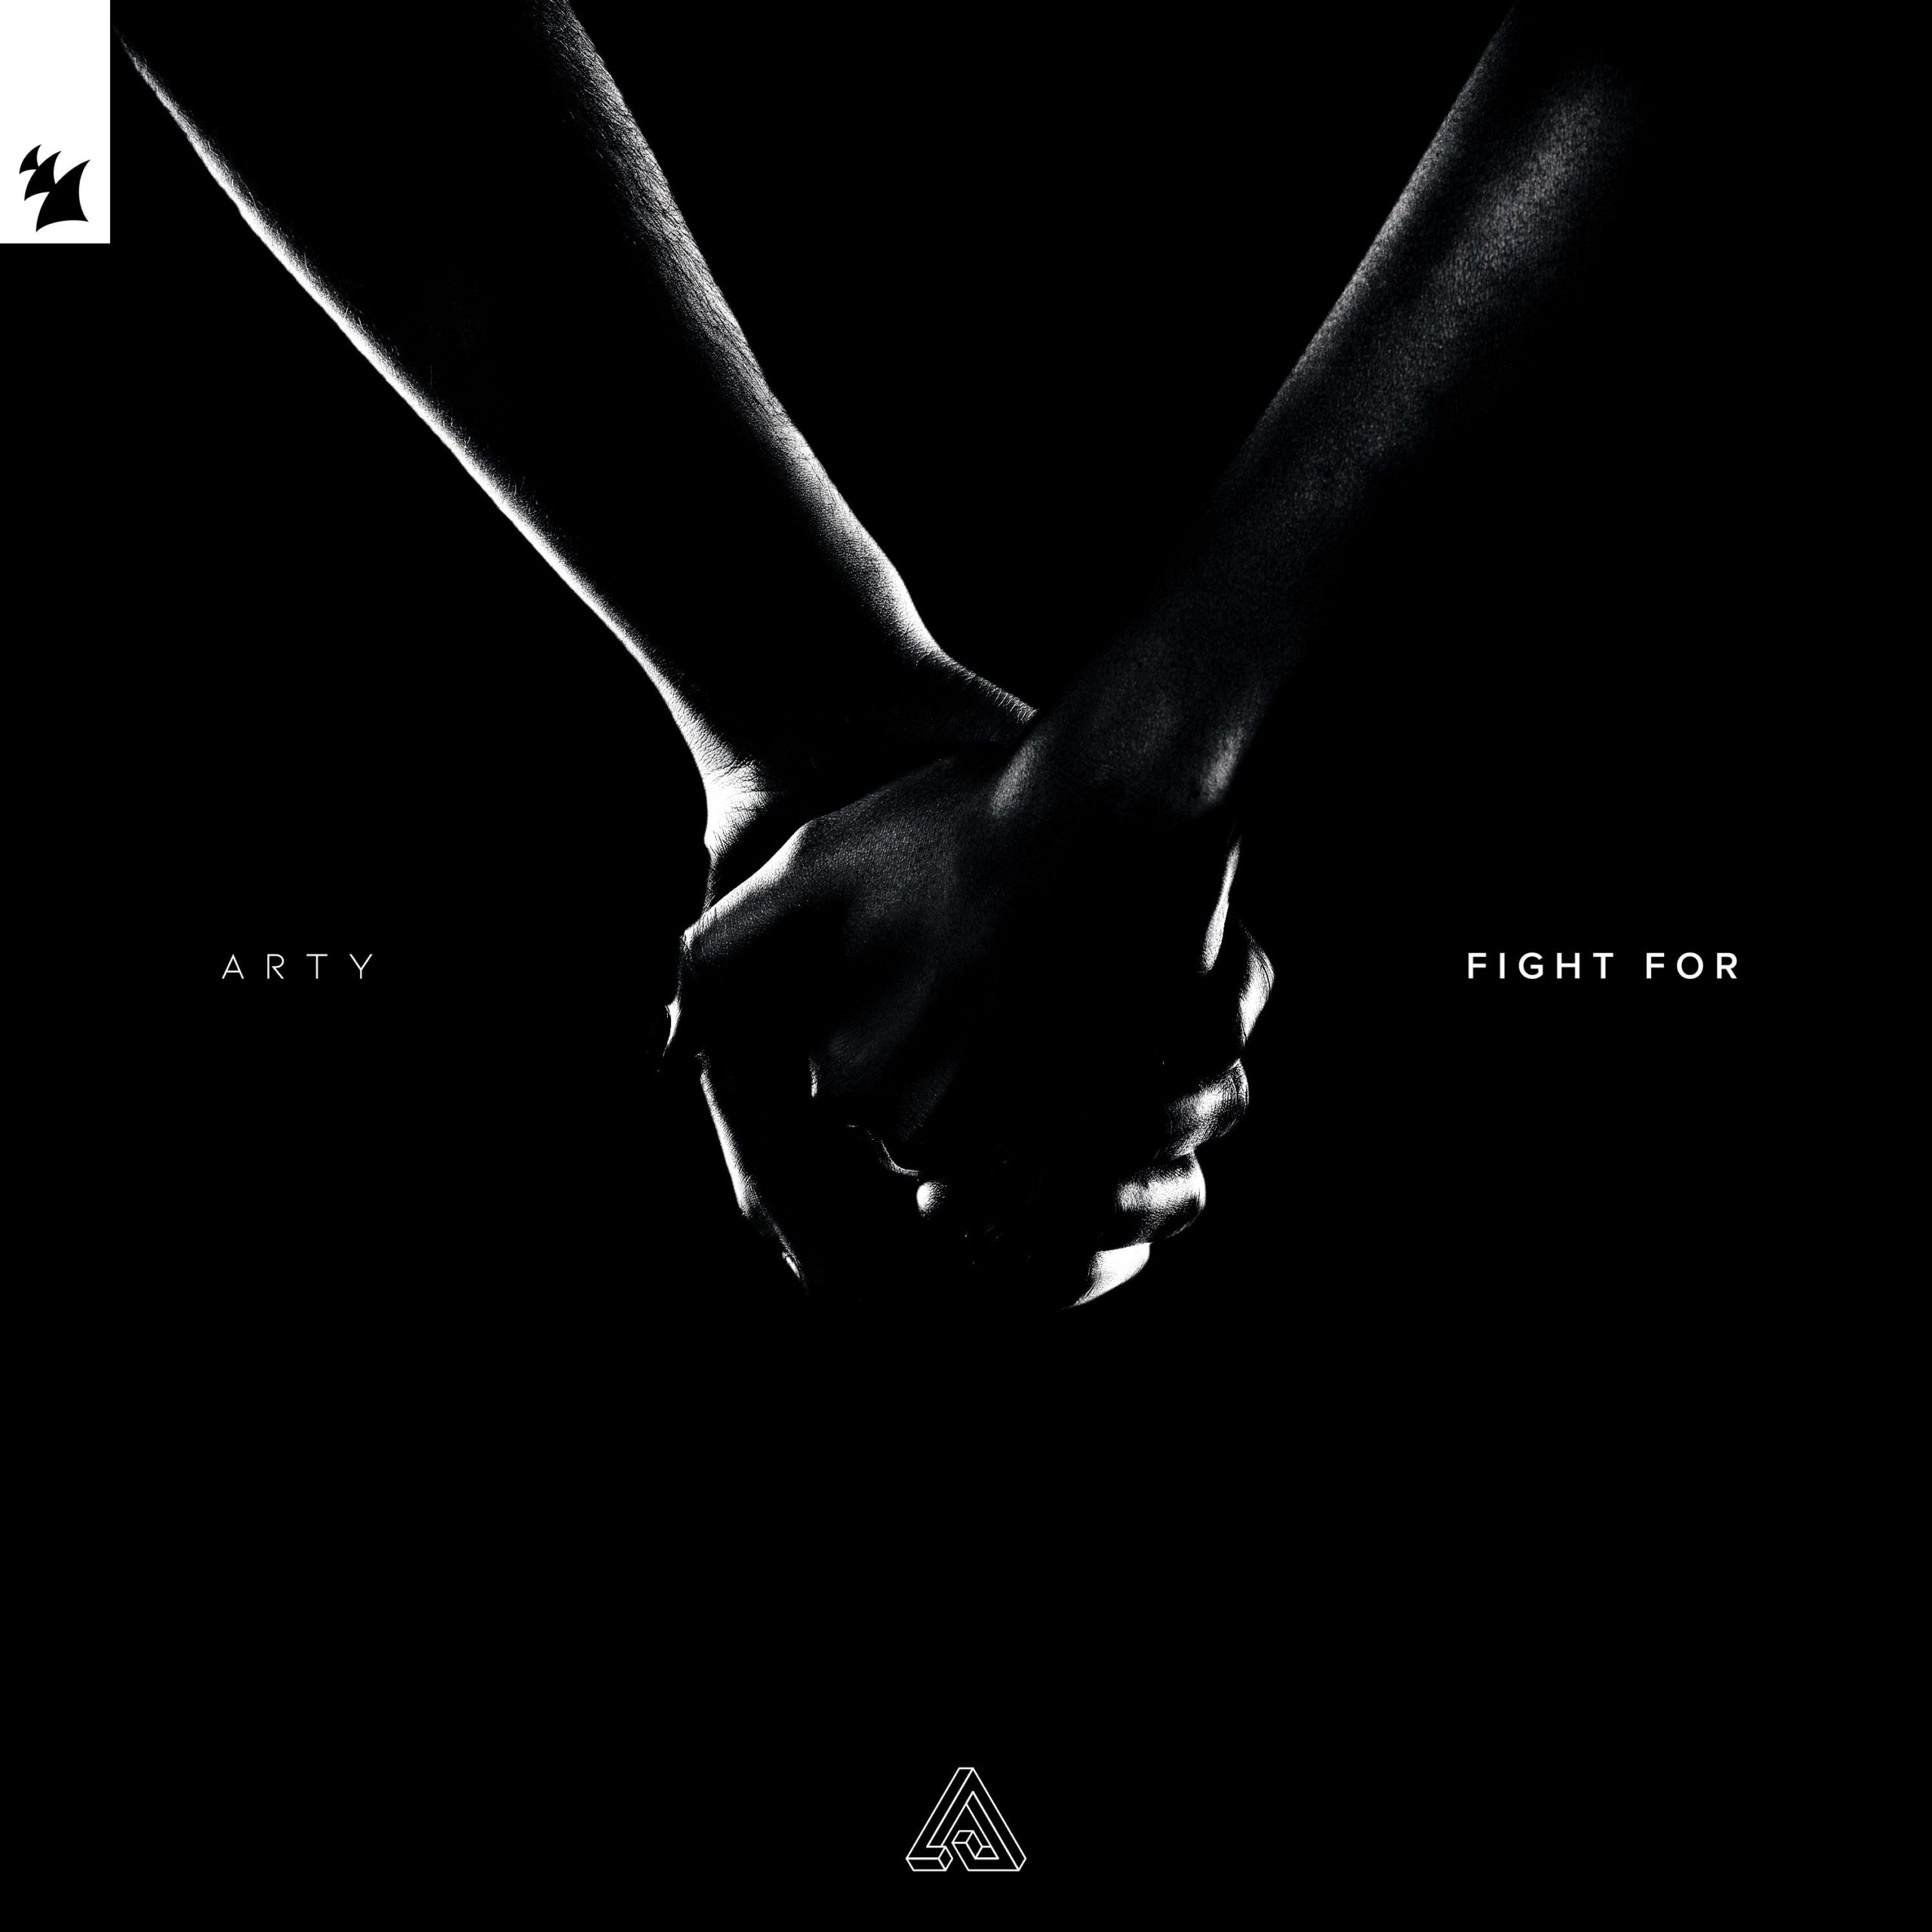 ARTY presents Fight For on Armada Music